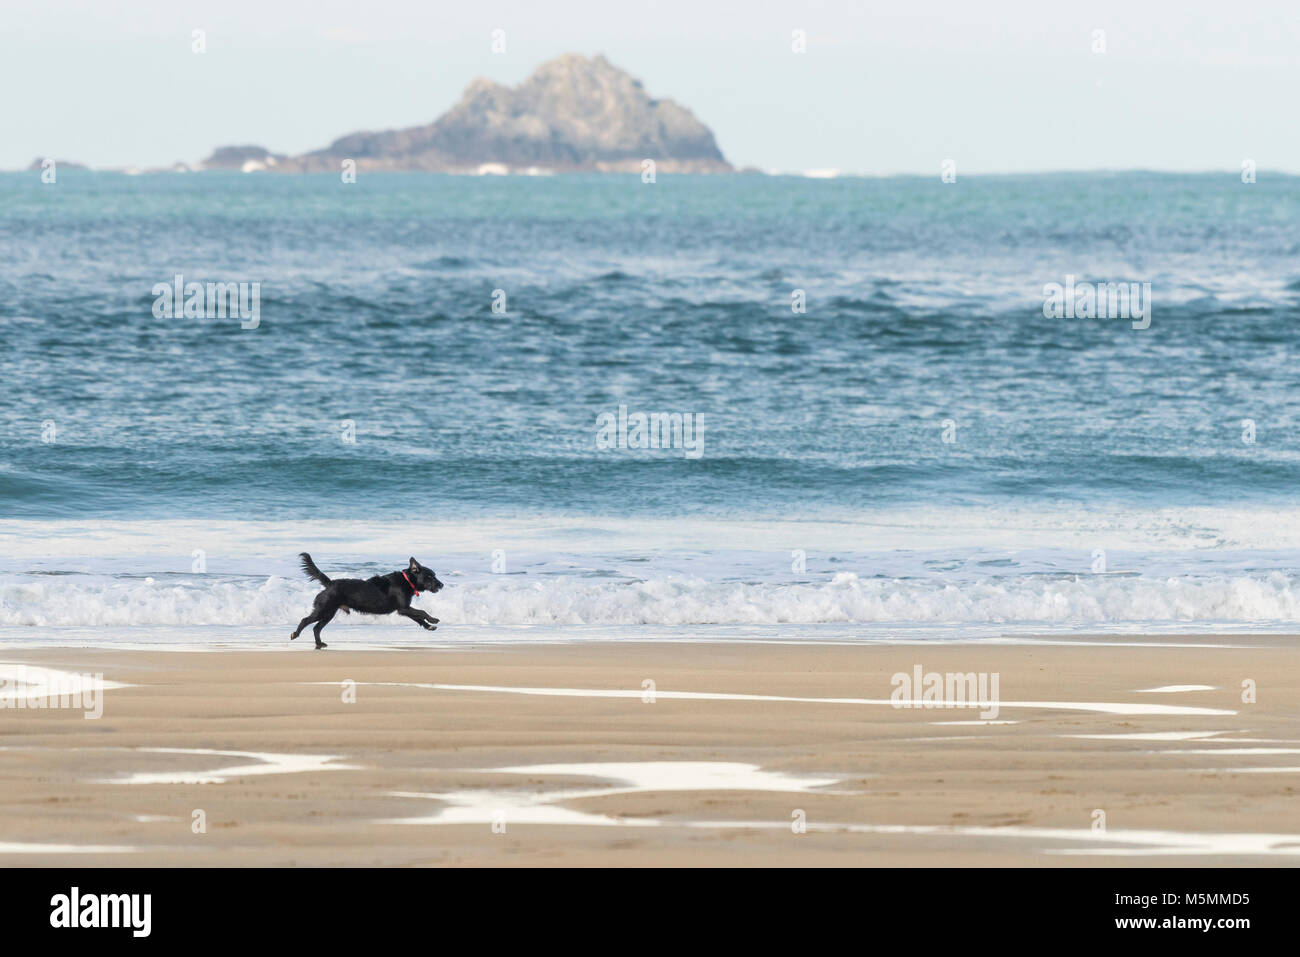 A dog running along the shoreline at Sennen Cove in Cornwall. Stock Photo